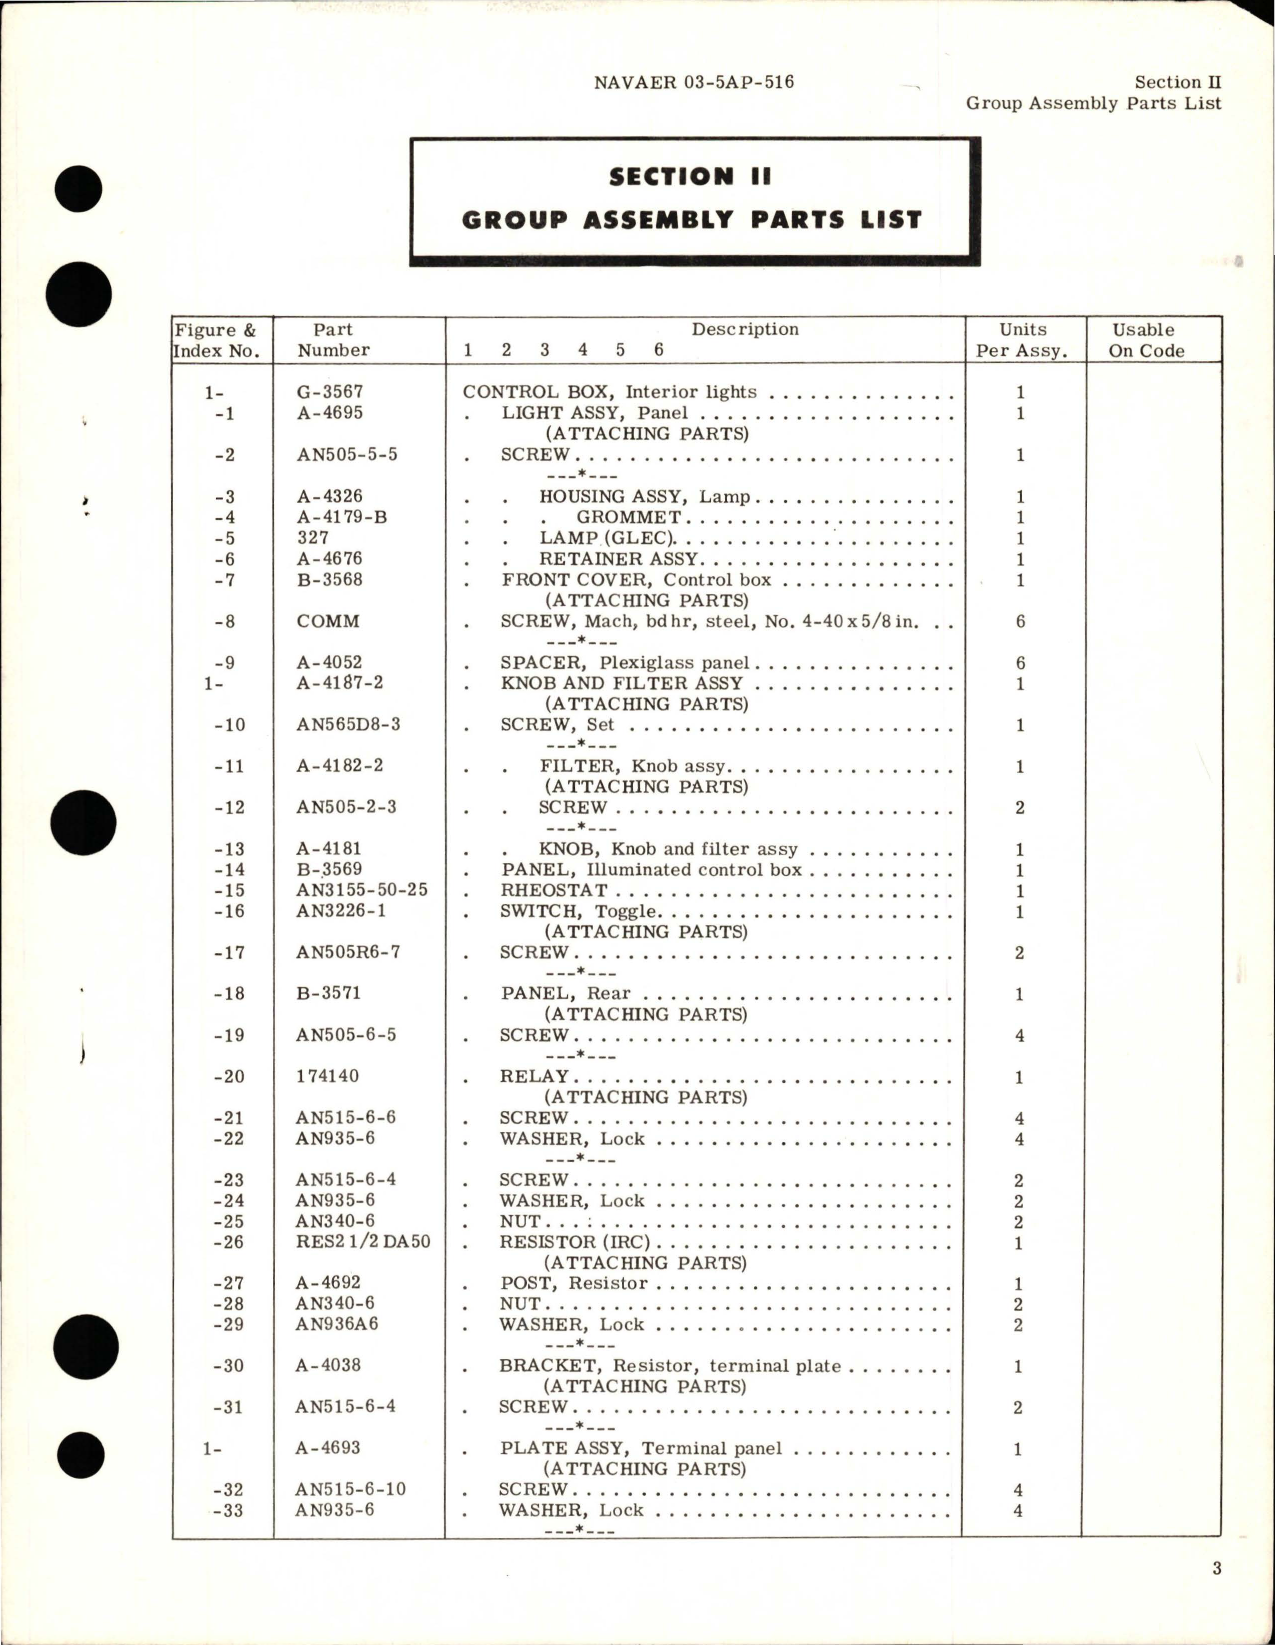 Sample page 5 from AirCorps Library document: Illustrated Parts Breakdown for Interior Lights Control Box - Part G-3567